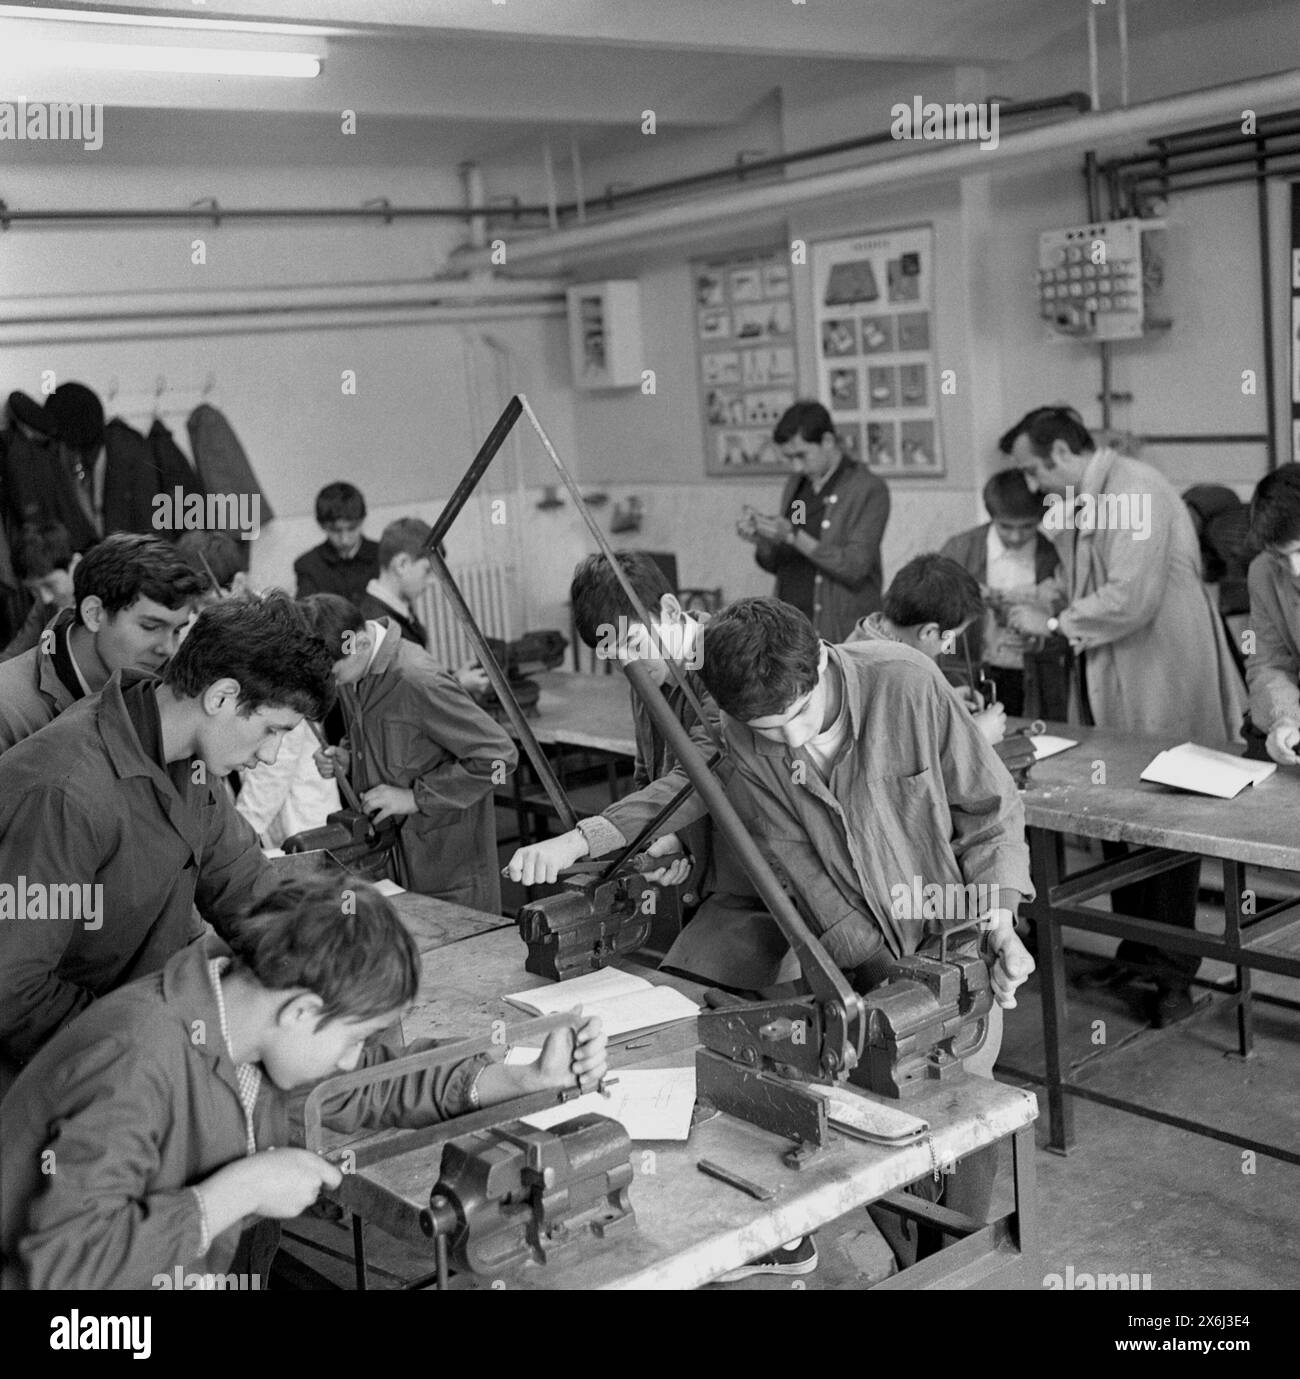 Socialist Republic of Romania in the 1970s. Students in the workshop of a governmental vocational school. Stock Photo